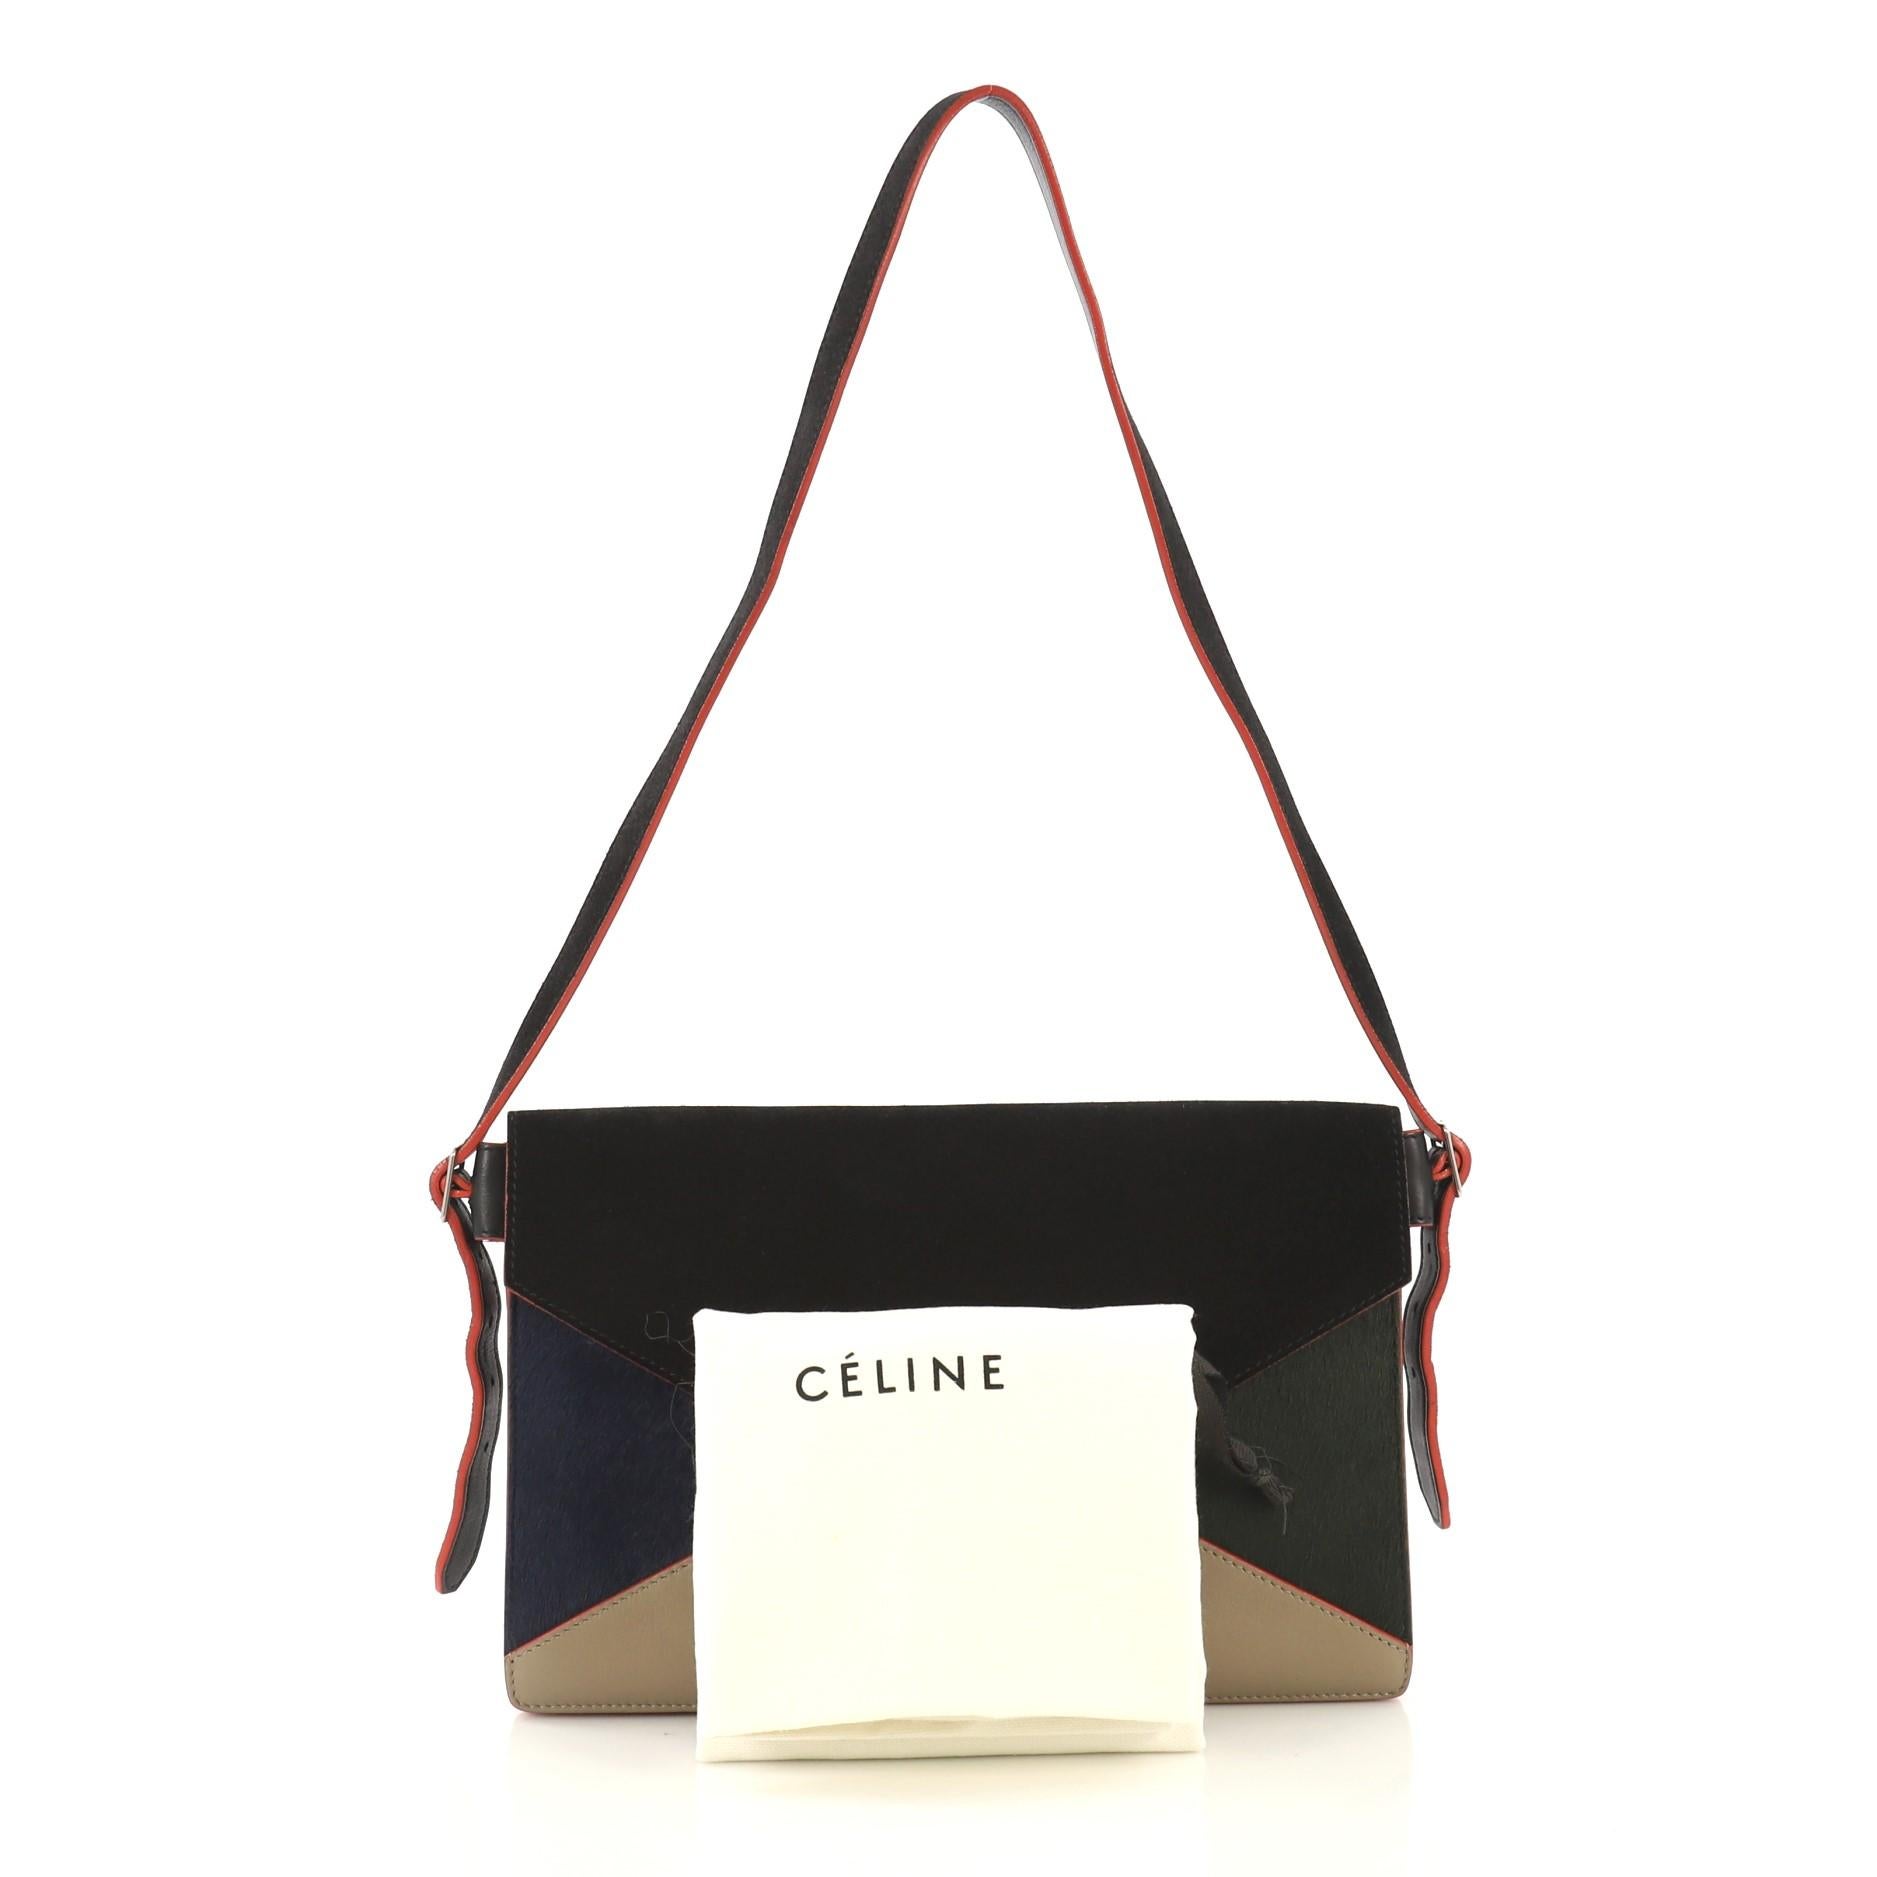 This Celine Diamond Shoulder Bag Pony Hair and Leather Medium, crafted from blue and green pony hair, black suede, and beige and black leather, features an adjustable strap, exterior zip back pocket, and silver-tone hardware. Its press-lock closure